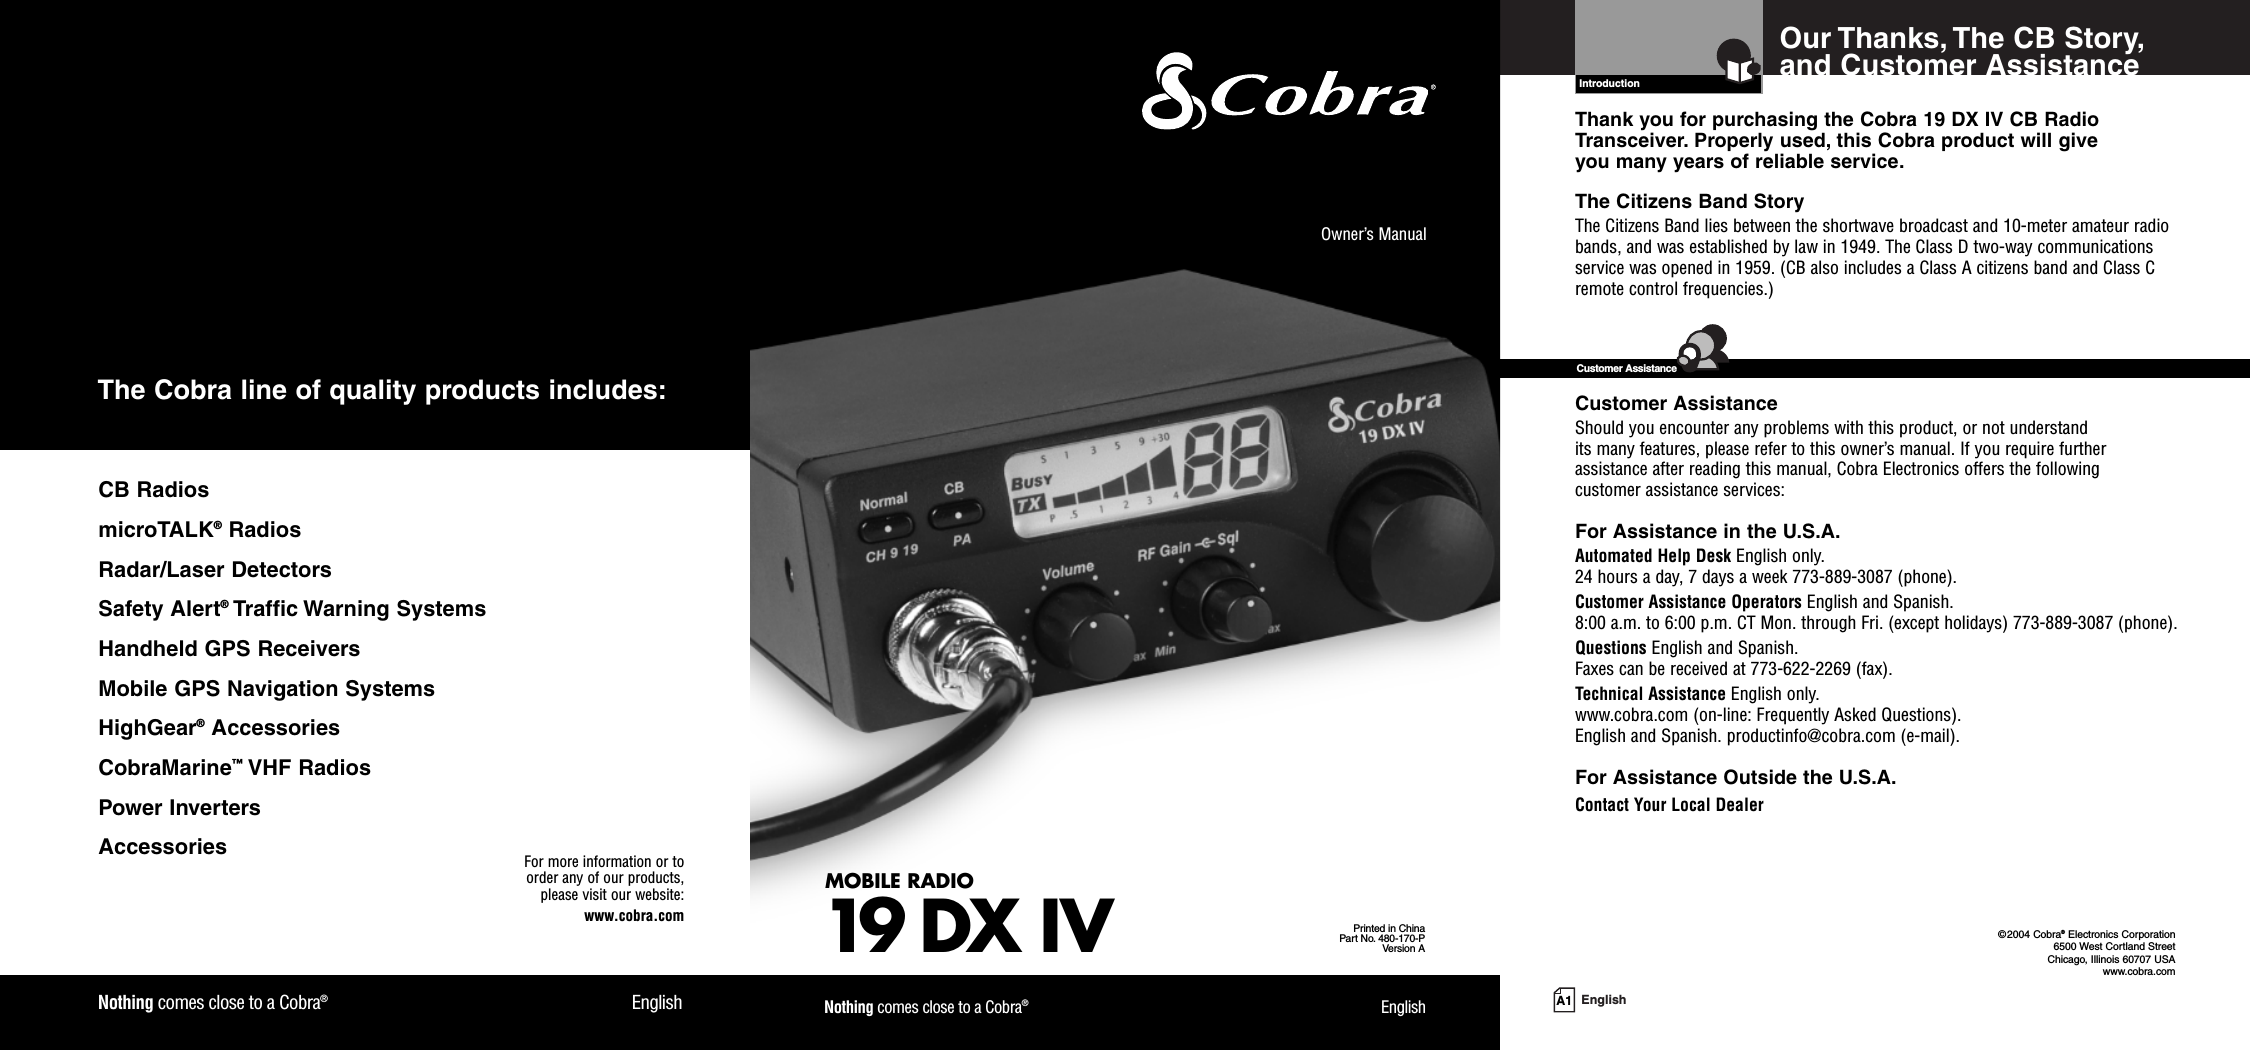 A1 EnglishOur Thanks, The CB Story,and Customer AssistanceIntroductionThank you for purchasing the Cobra 19 DX IV CB RadioTransceiver. Properly used, this Cobra product will give you many years of reliable service.The Citizens Band StoryThe Citizens Band lies between the shortwave broadcast and 10-meter amateur radiobands, and was established by law in 1949. The Class D two-way communicationsservice was opened in 1959. (CB also includes a Class A citizens band and Class Cremote control frequencies.)Customer AssistanceShould you encounter any problems with this product, or not understand its many features, please refer to this owner’s manual. If you require further assistance after reading this manual, Cobra Electronics offers the following customer assistance services:For Assistance in the U.S.A.Automated Help Desk English only.24 hours a day, 7 days a week 773-889-3087 (phone).Customer Assistance Operators English and Spanish.8:00 a.m. to 6:00 p.m. CT Mon. through Fri. (except holidays) 773-889-3087 (phone).Questions English and Spanish.Faxes can be received at 773-622-2269 (fax).Technical Assistance English only.www.cobra.com (on-line: Frequently Asked Questions).English and Spanish. productinfo@cobra.com (e-mail).For Assistance Outside the U.S.A.Contact Your Local DealerCustomer Assistance©2004 Cobra®Electronics Corporation6500 West Cortland StreetChicago, Illinois 60707 USAwww.cobra.comMOBILE RADIO19 DXIVPrinted in ChinaPart No. 480-170-PVersion AOwner’s ManualNothing comes close to a Cobra®EnglishNothing comes close to a Cobra®EnglishFor more information or to order any of our products, please visit our website:www.cobra.comCB RadiosmicroTALK®RadiosRadar/Laser DetectorsSafety Alert®Traffic Warning SystemsHandheld GPS ReceiversMobile GPS Navigation SystemsHighGear®AccessoriesCobraMarine™VHF RadiosPower InvertersAccessoriesThe Cobra line of quality products includes: